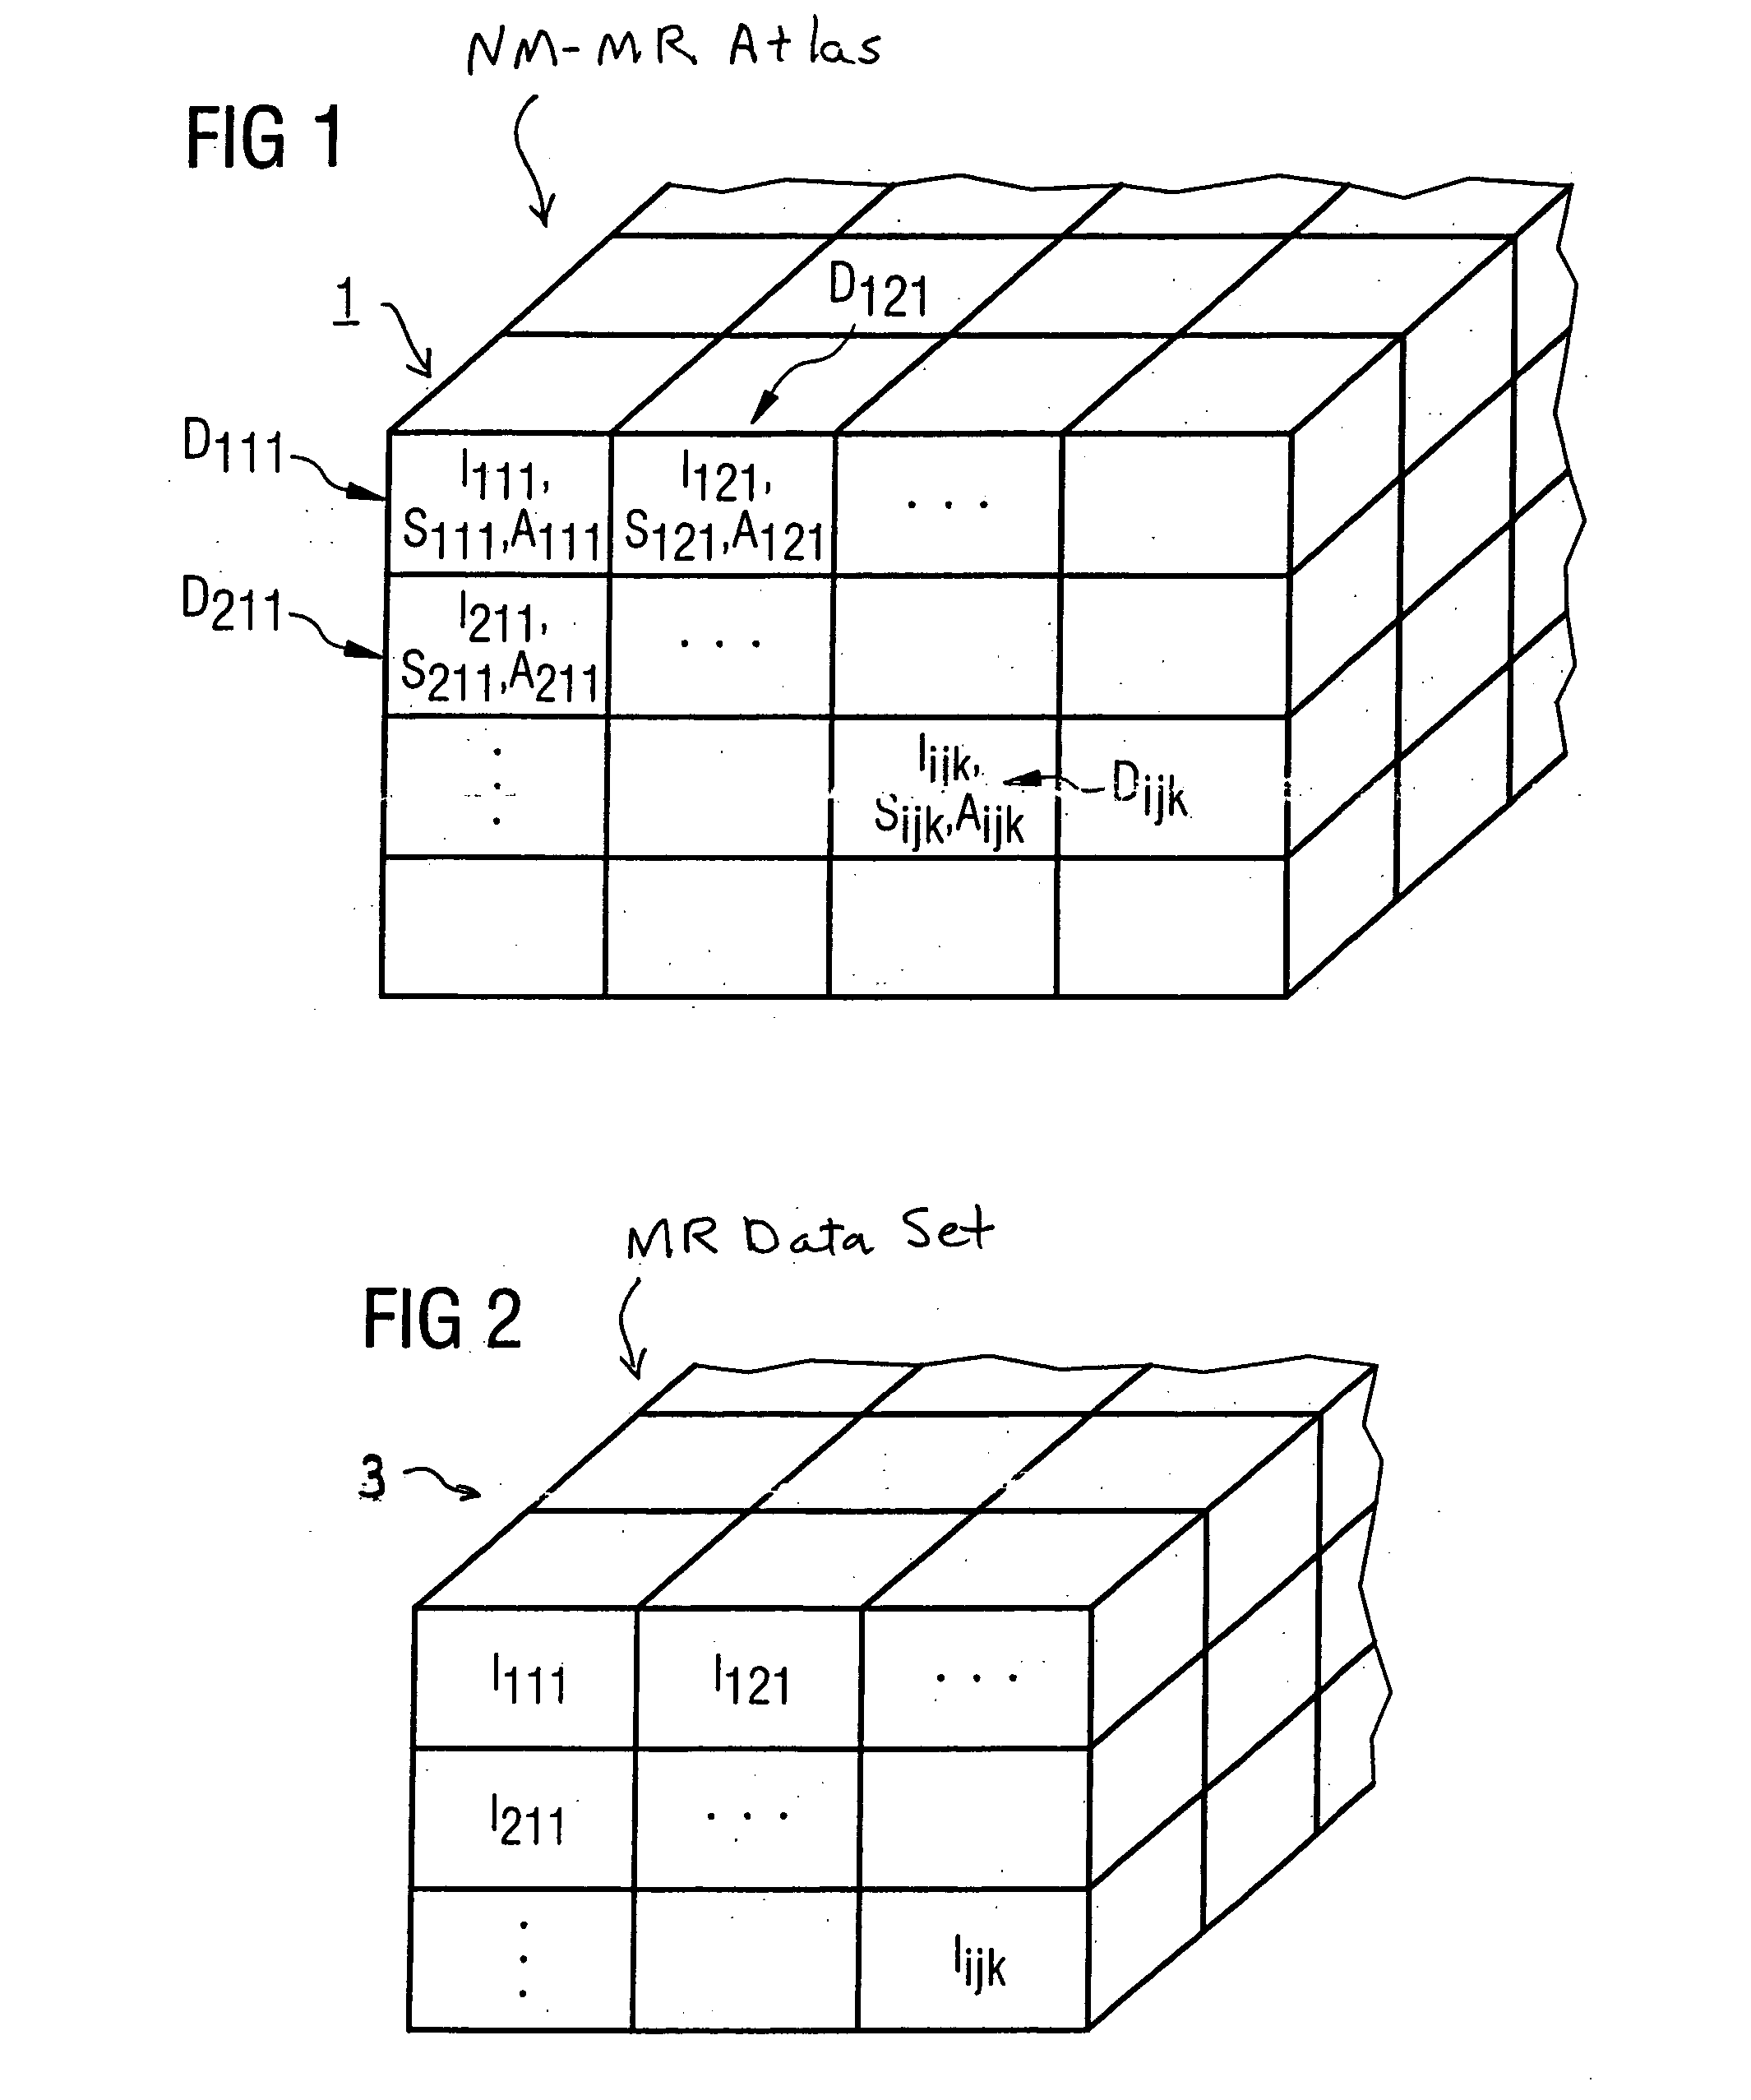 Method for generating an MR atlas and for MR imaging using same